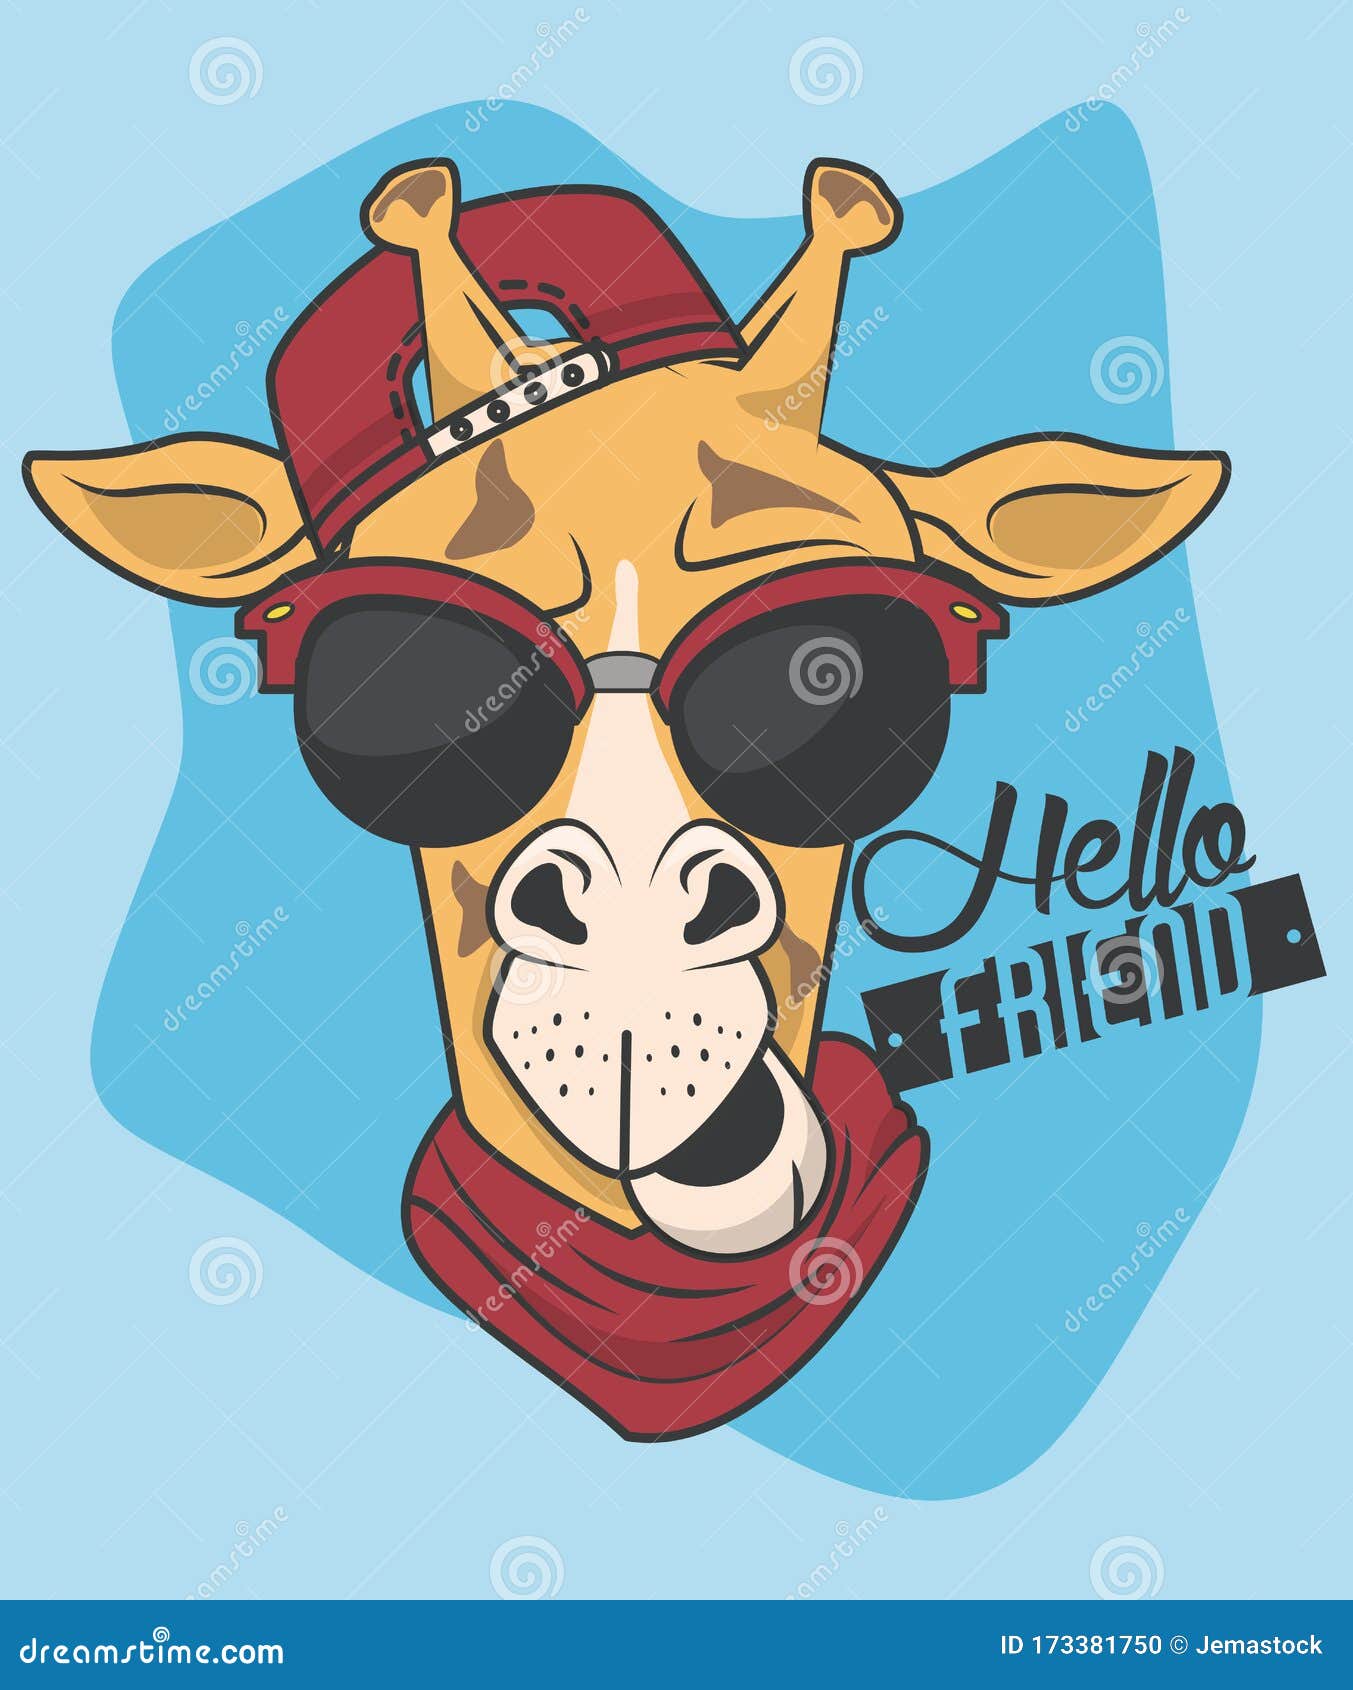 Funny Giraffe With Sunglasses Cool Style Stock Vector Illustration Of Long Adorable 173381750